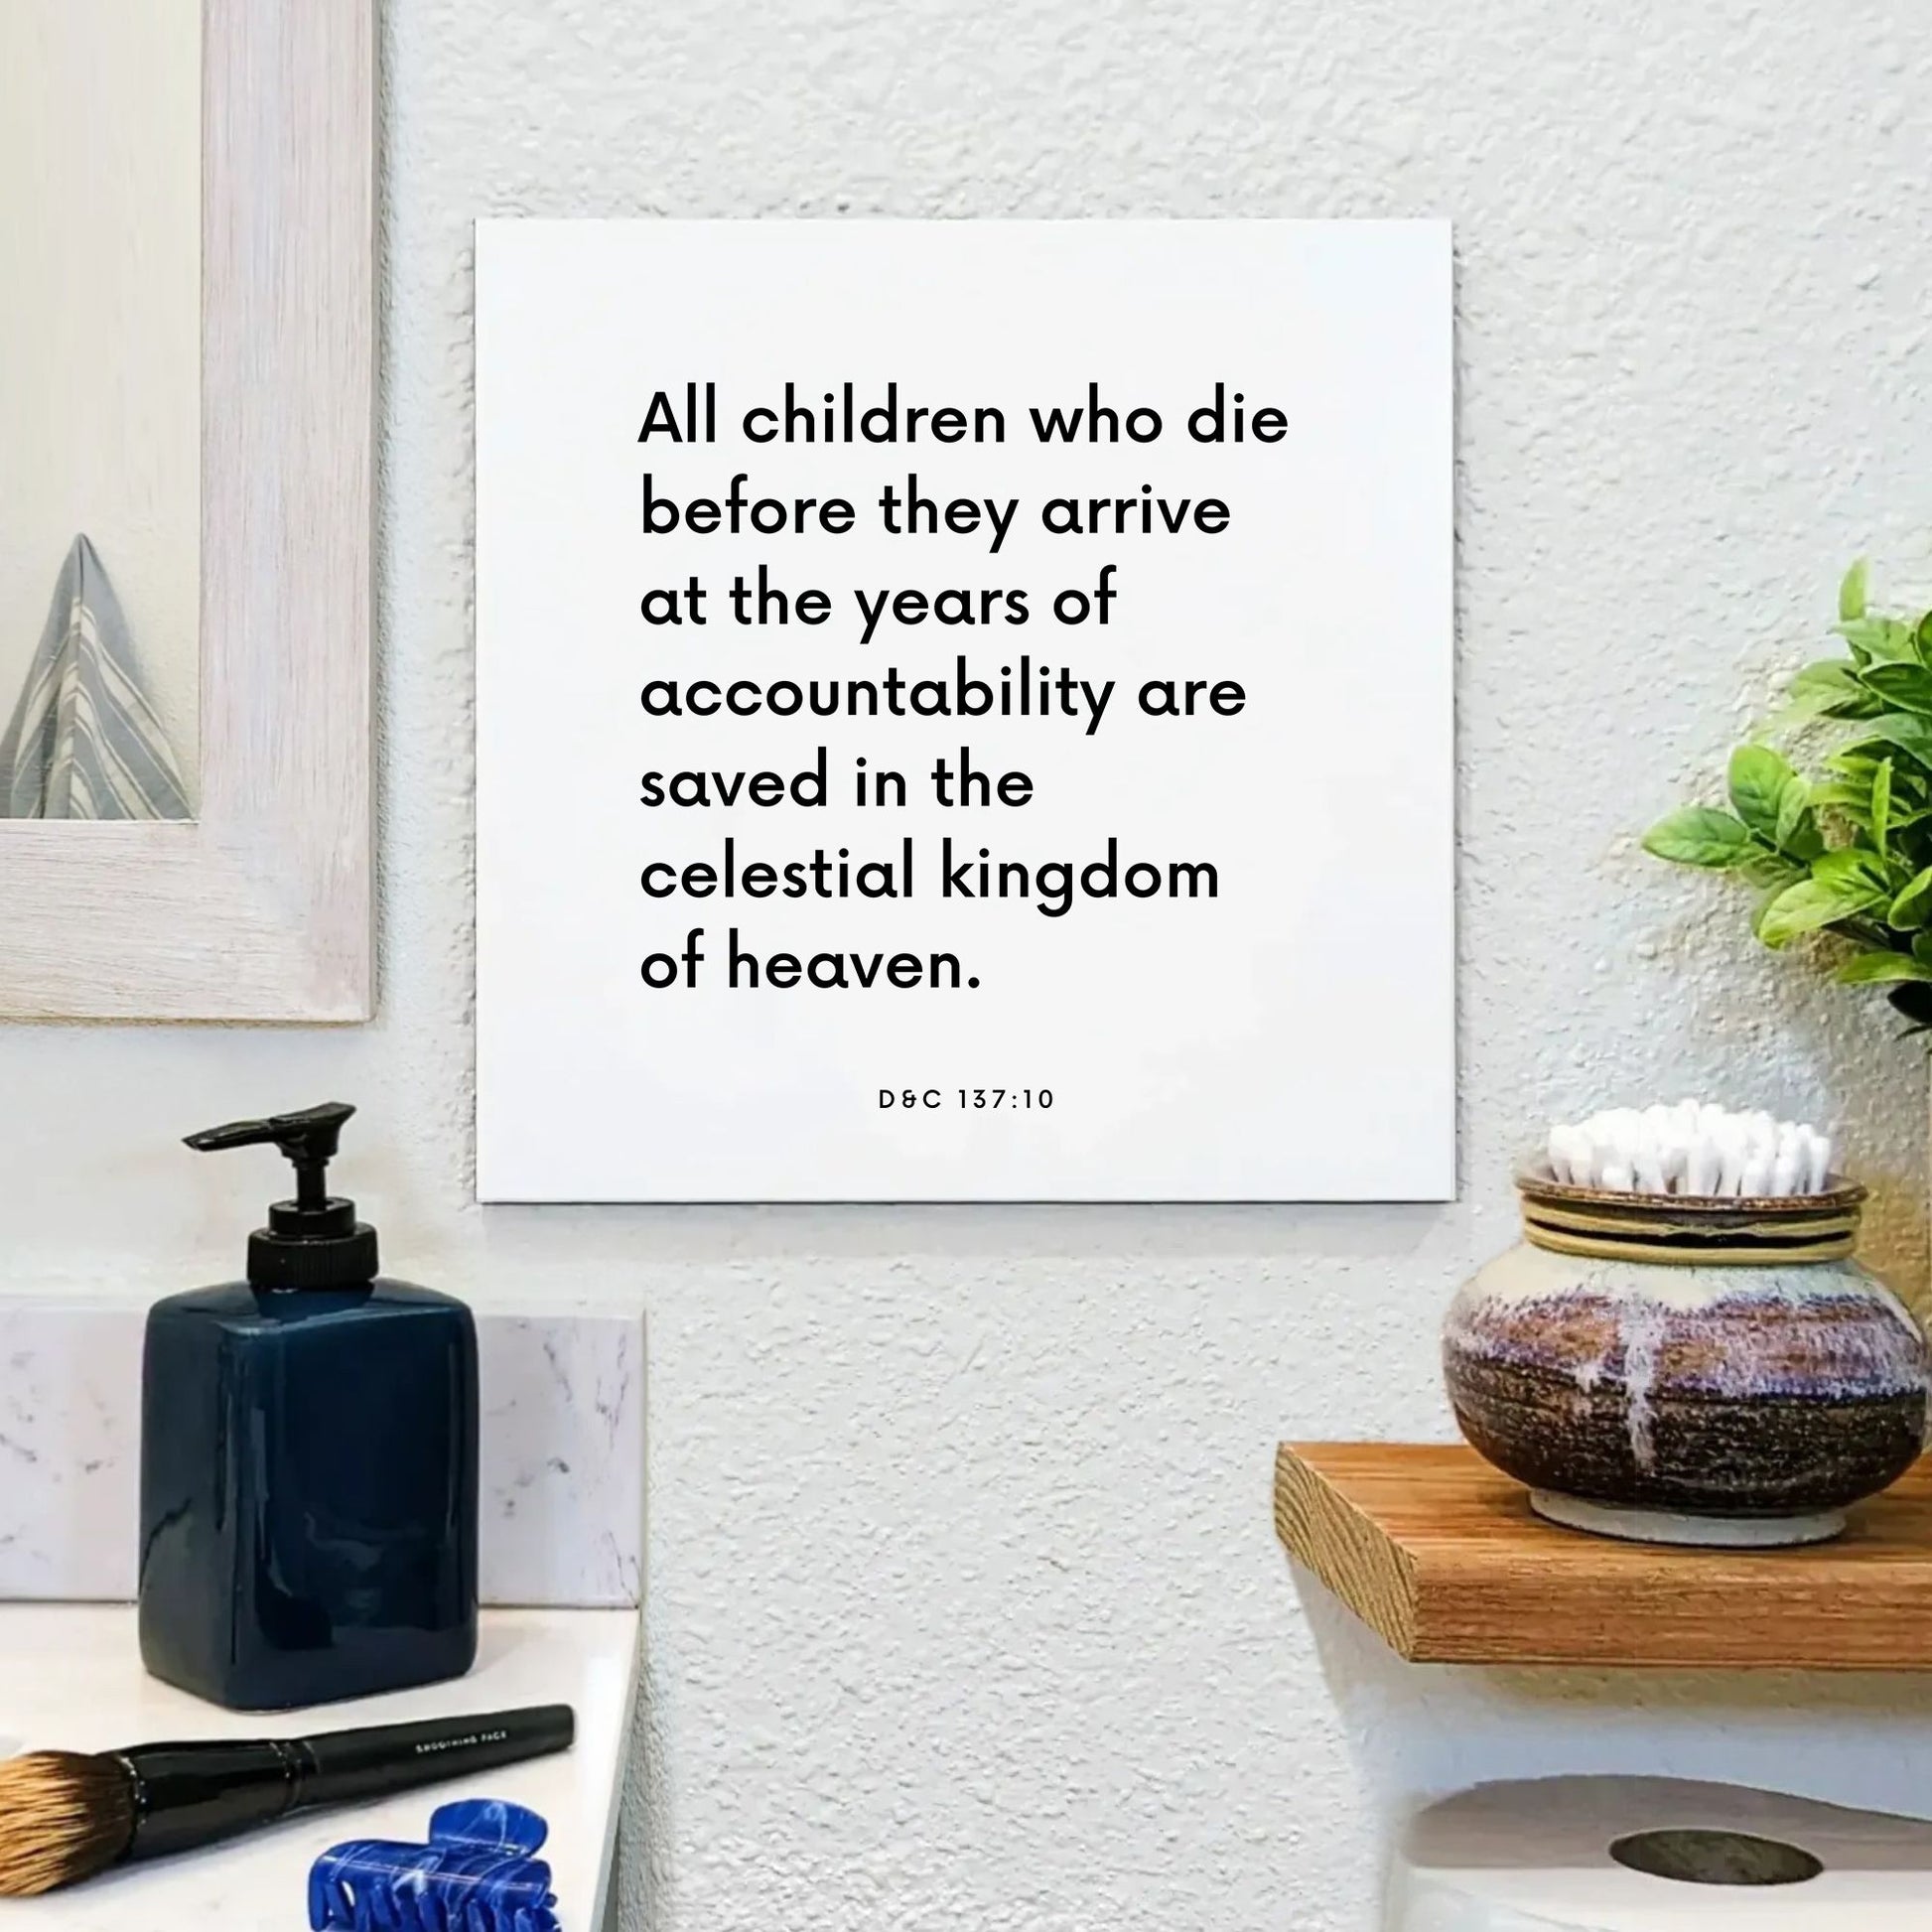 Bathroom mouting of the scripture tile for D&C 137:10 - "All children who die before the years of accountability"